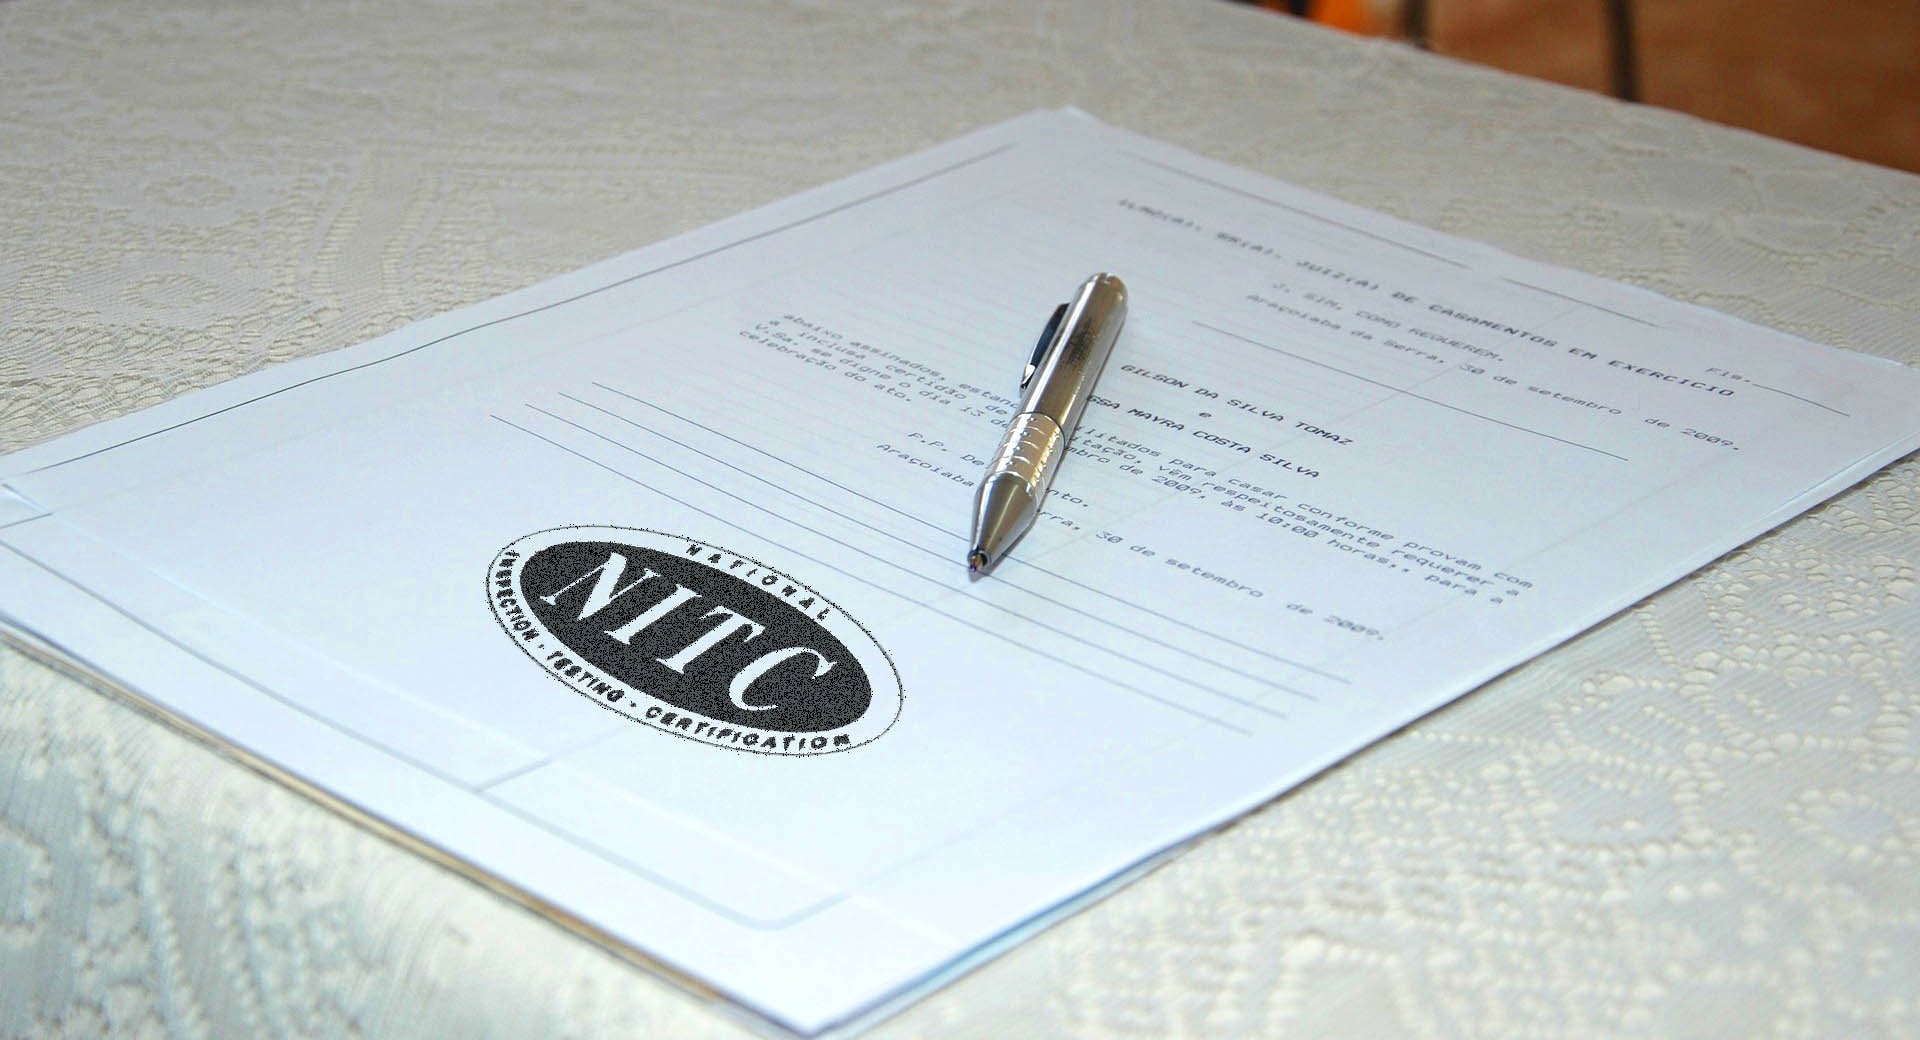 Use of the NITC Certification Mark